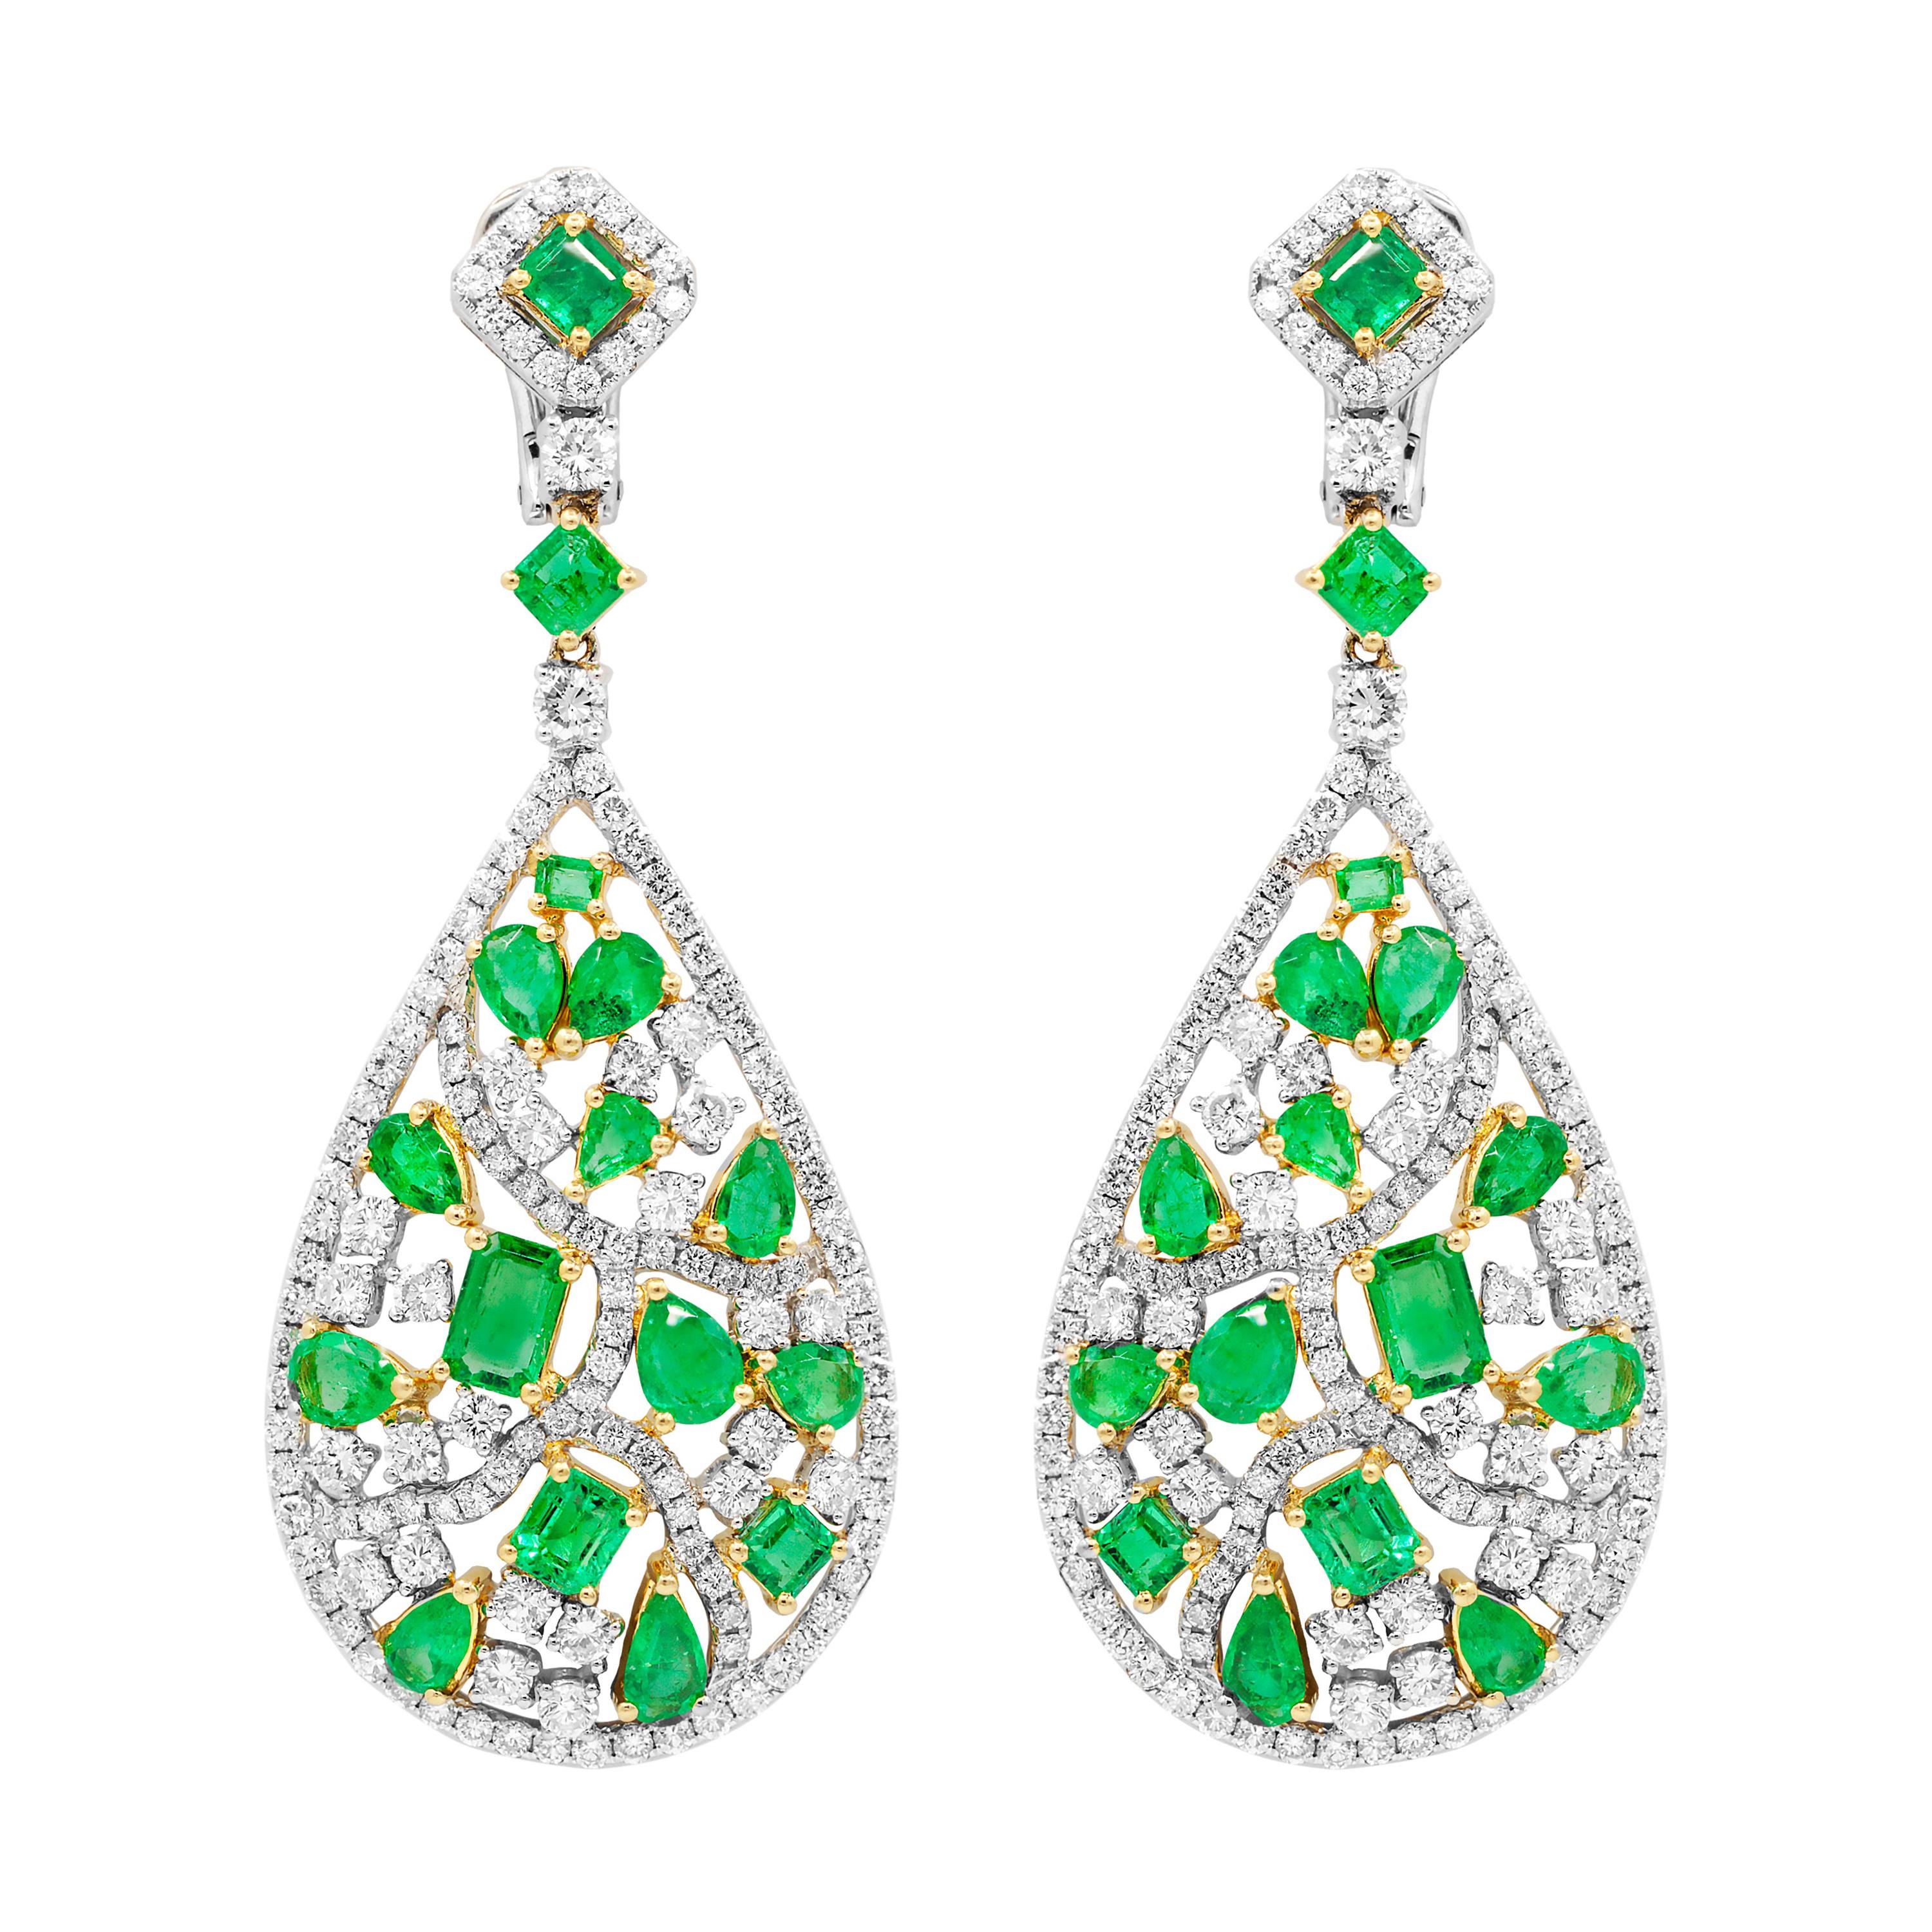 Diana M. 18k White and Yellow Gold Earrings with Emeralds and Diamonds For Sale